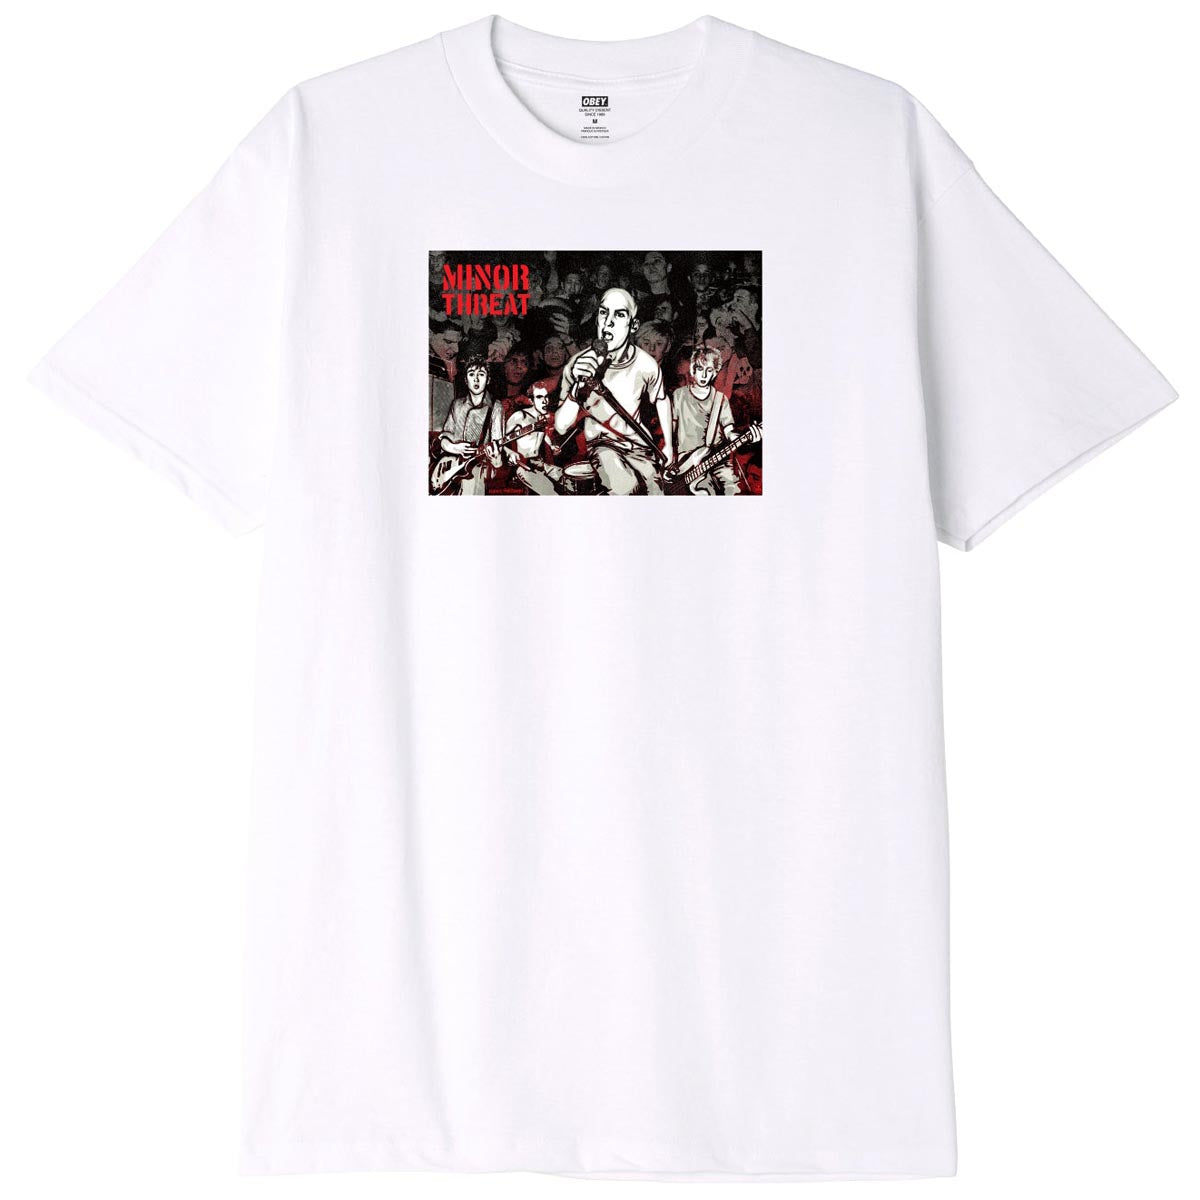 Obey Gef Just A Minor Threat T-Shirt - White image 1